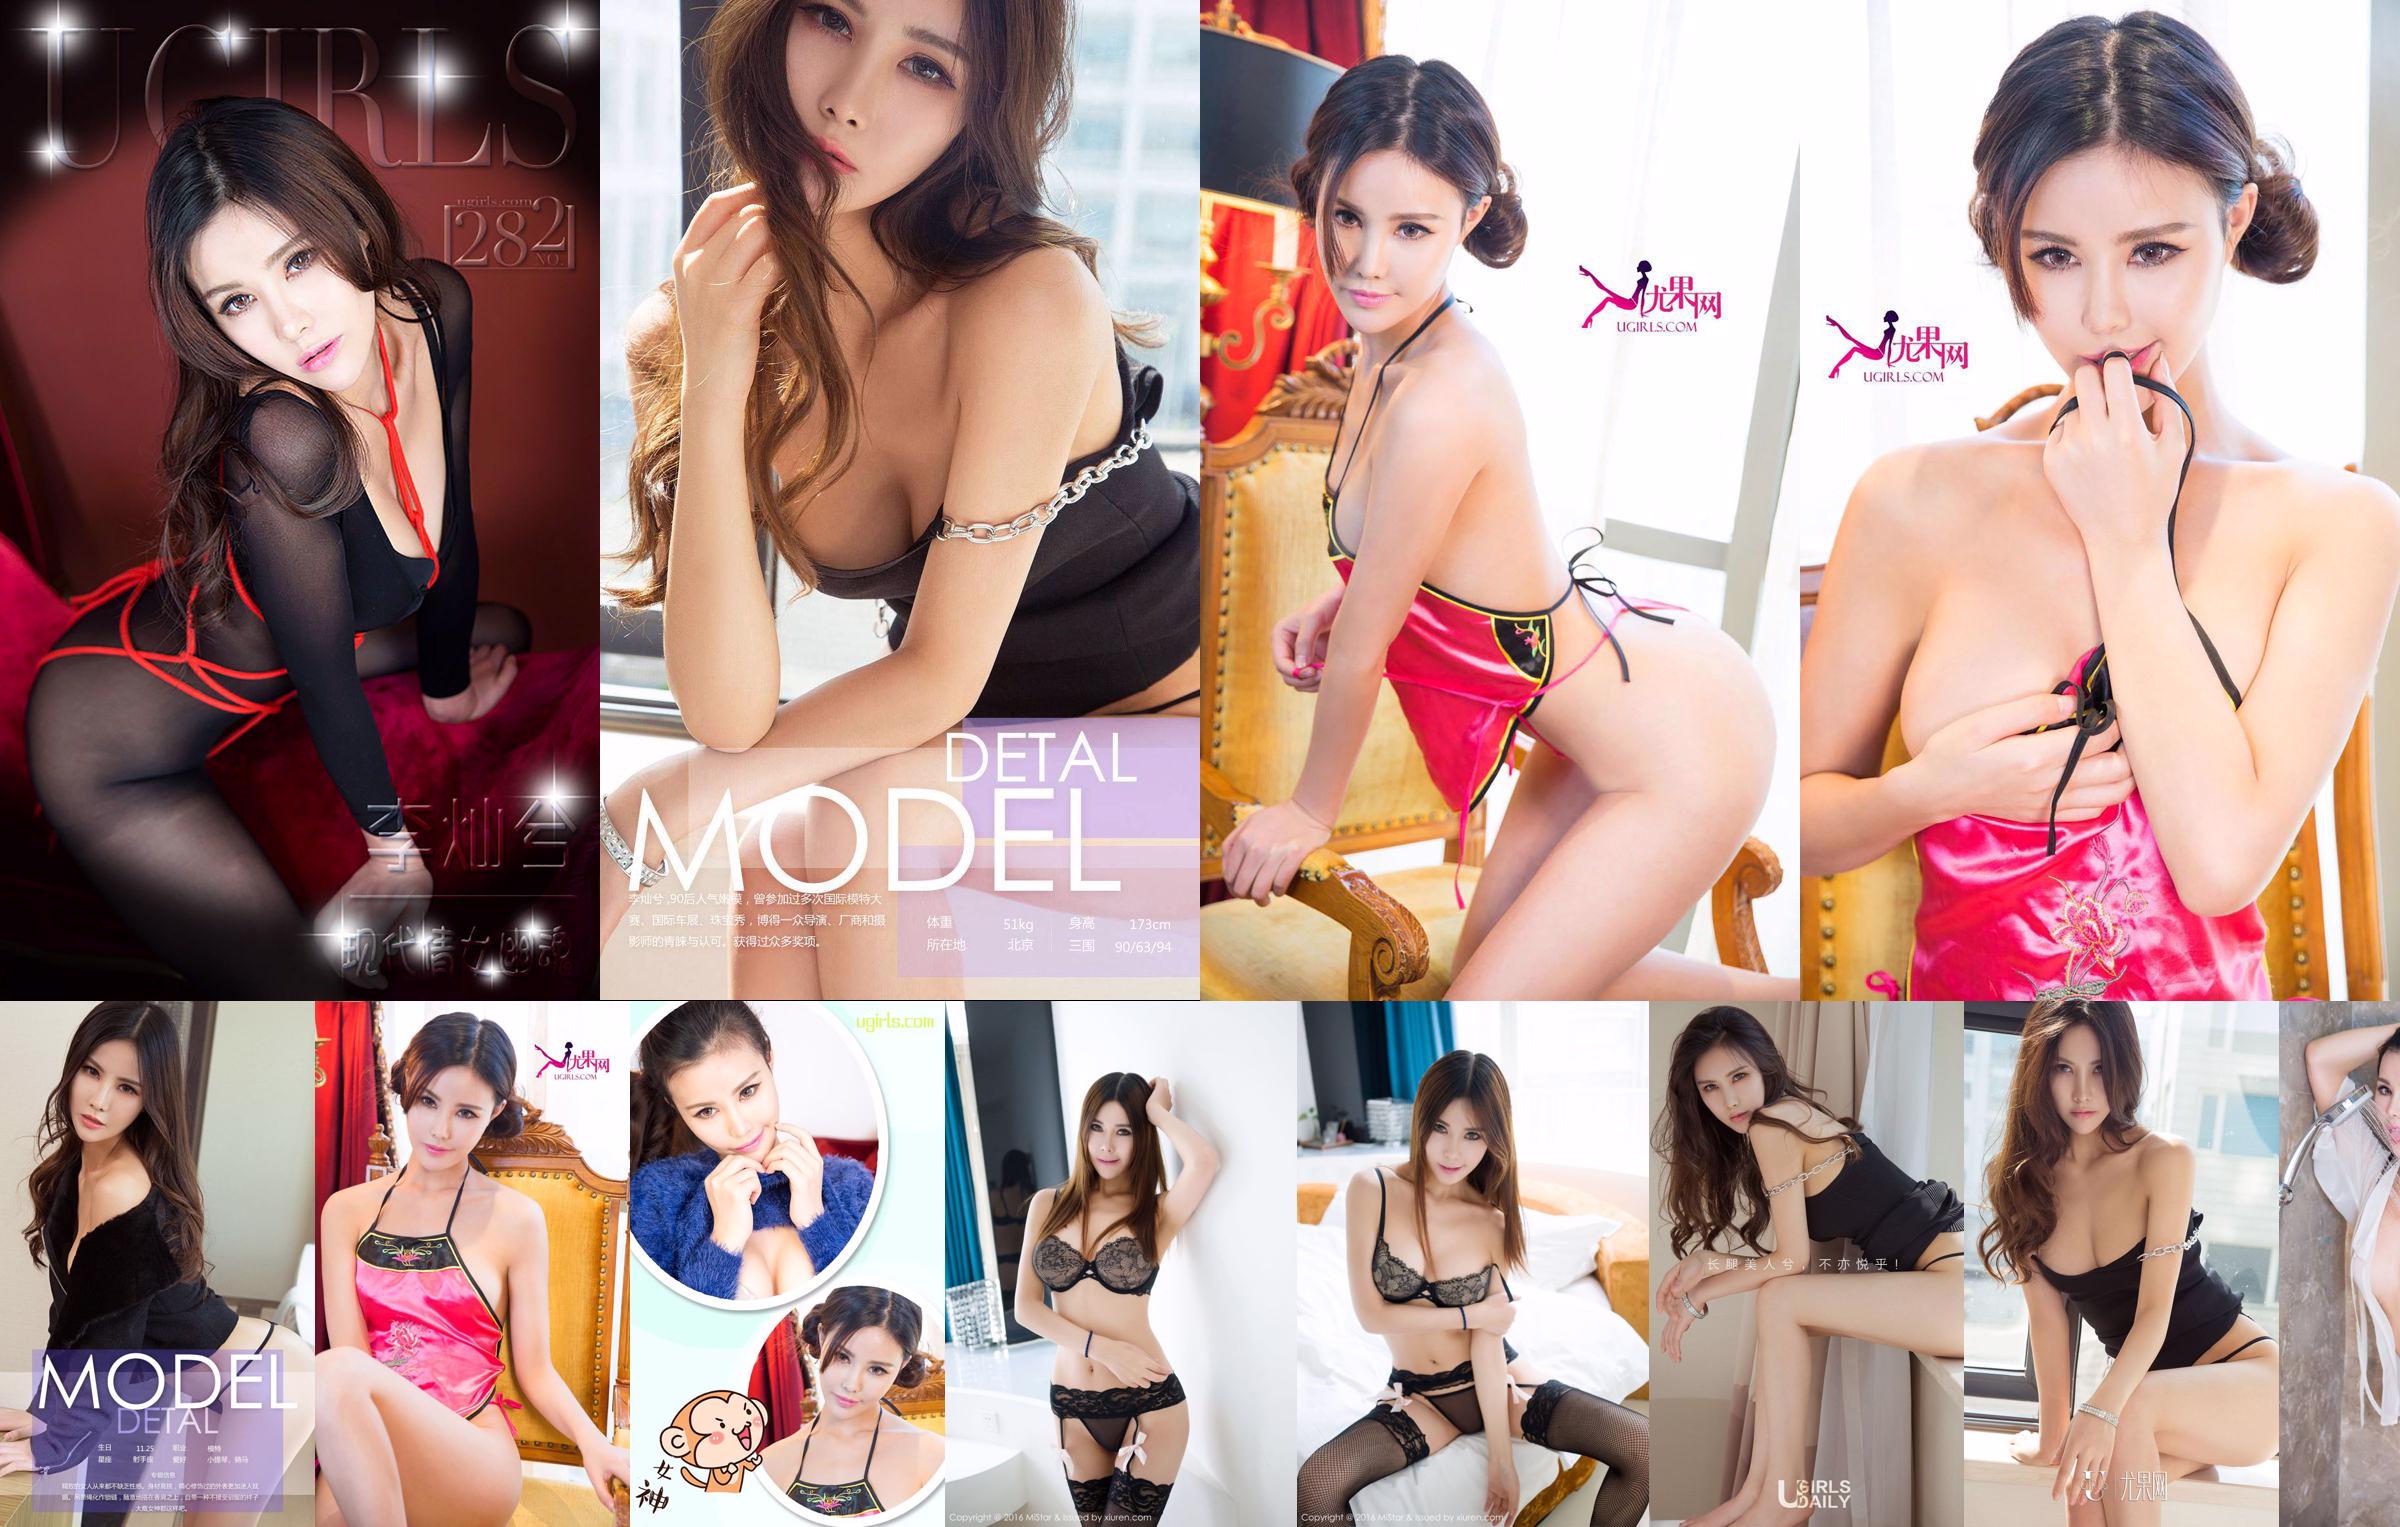 Canxi/Li Canxi "3 sets of sexy lingerie" [MiStar] Vol.097 No.afef68 Page 2